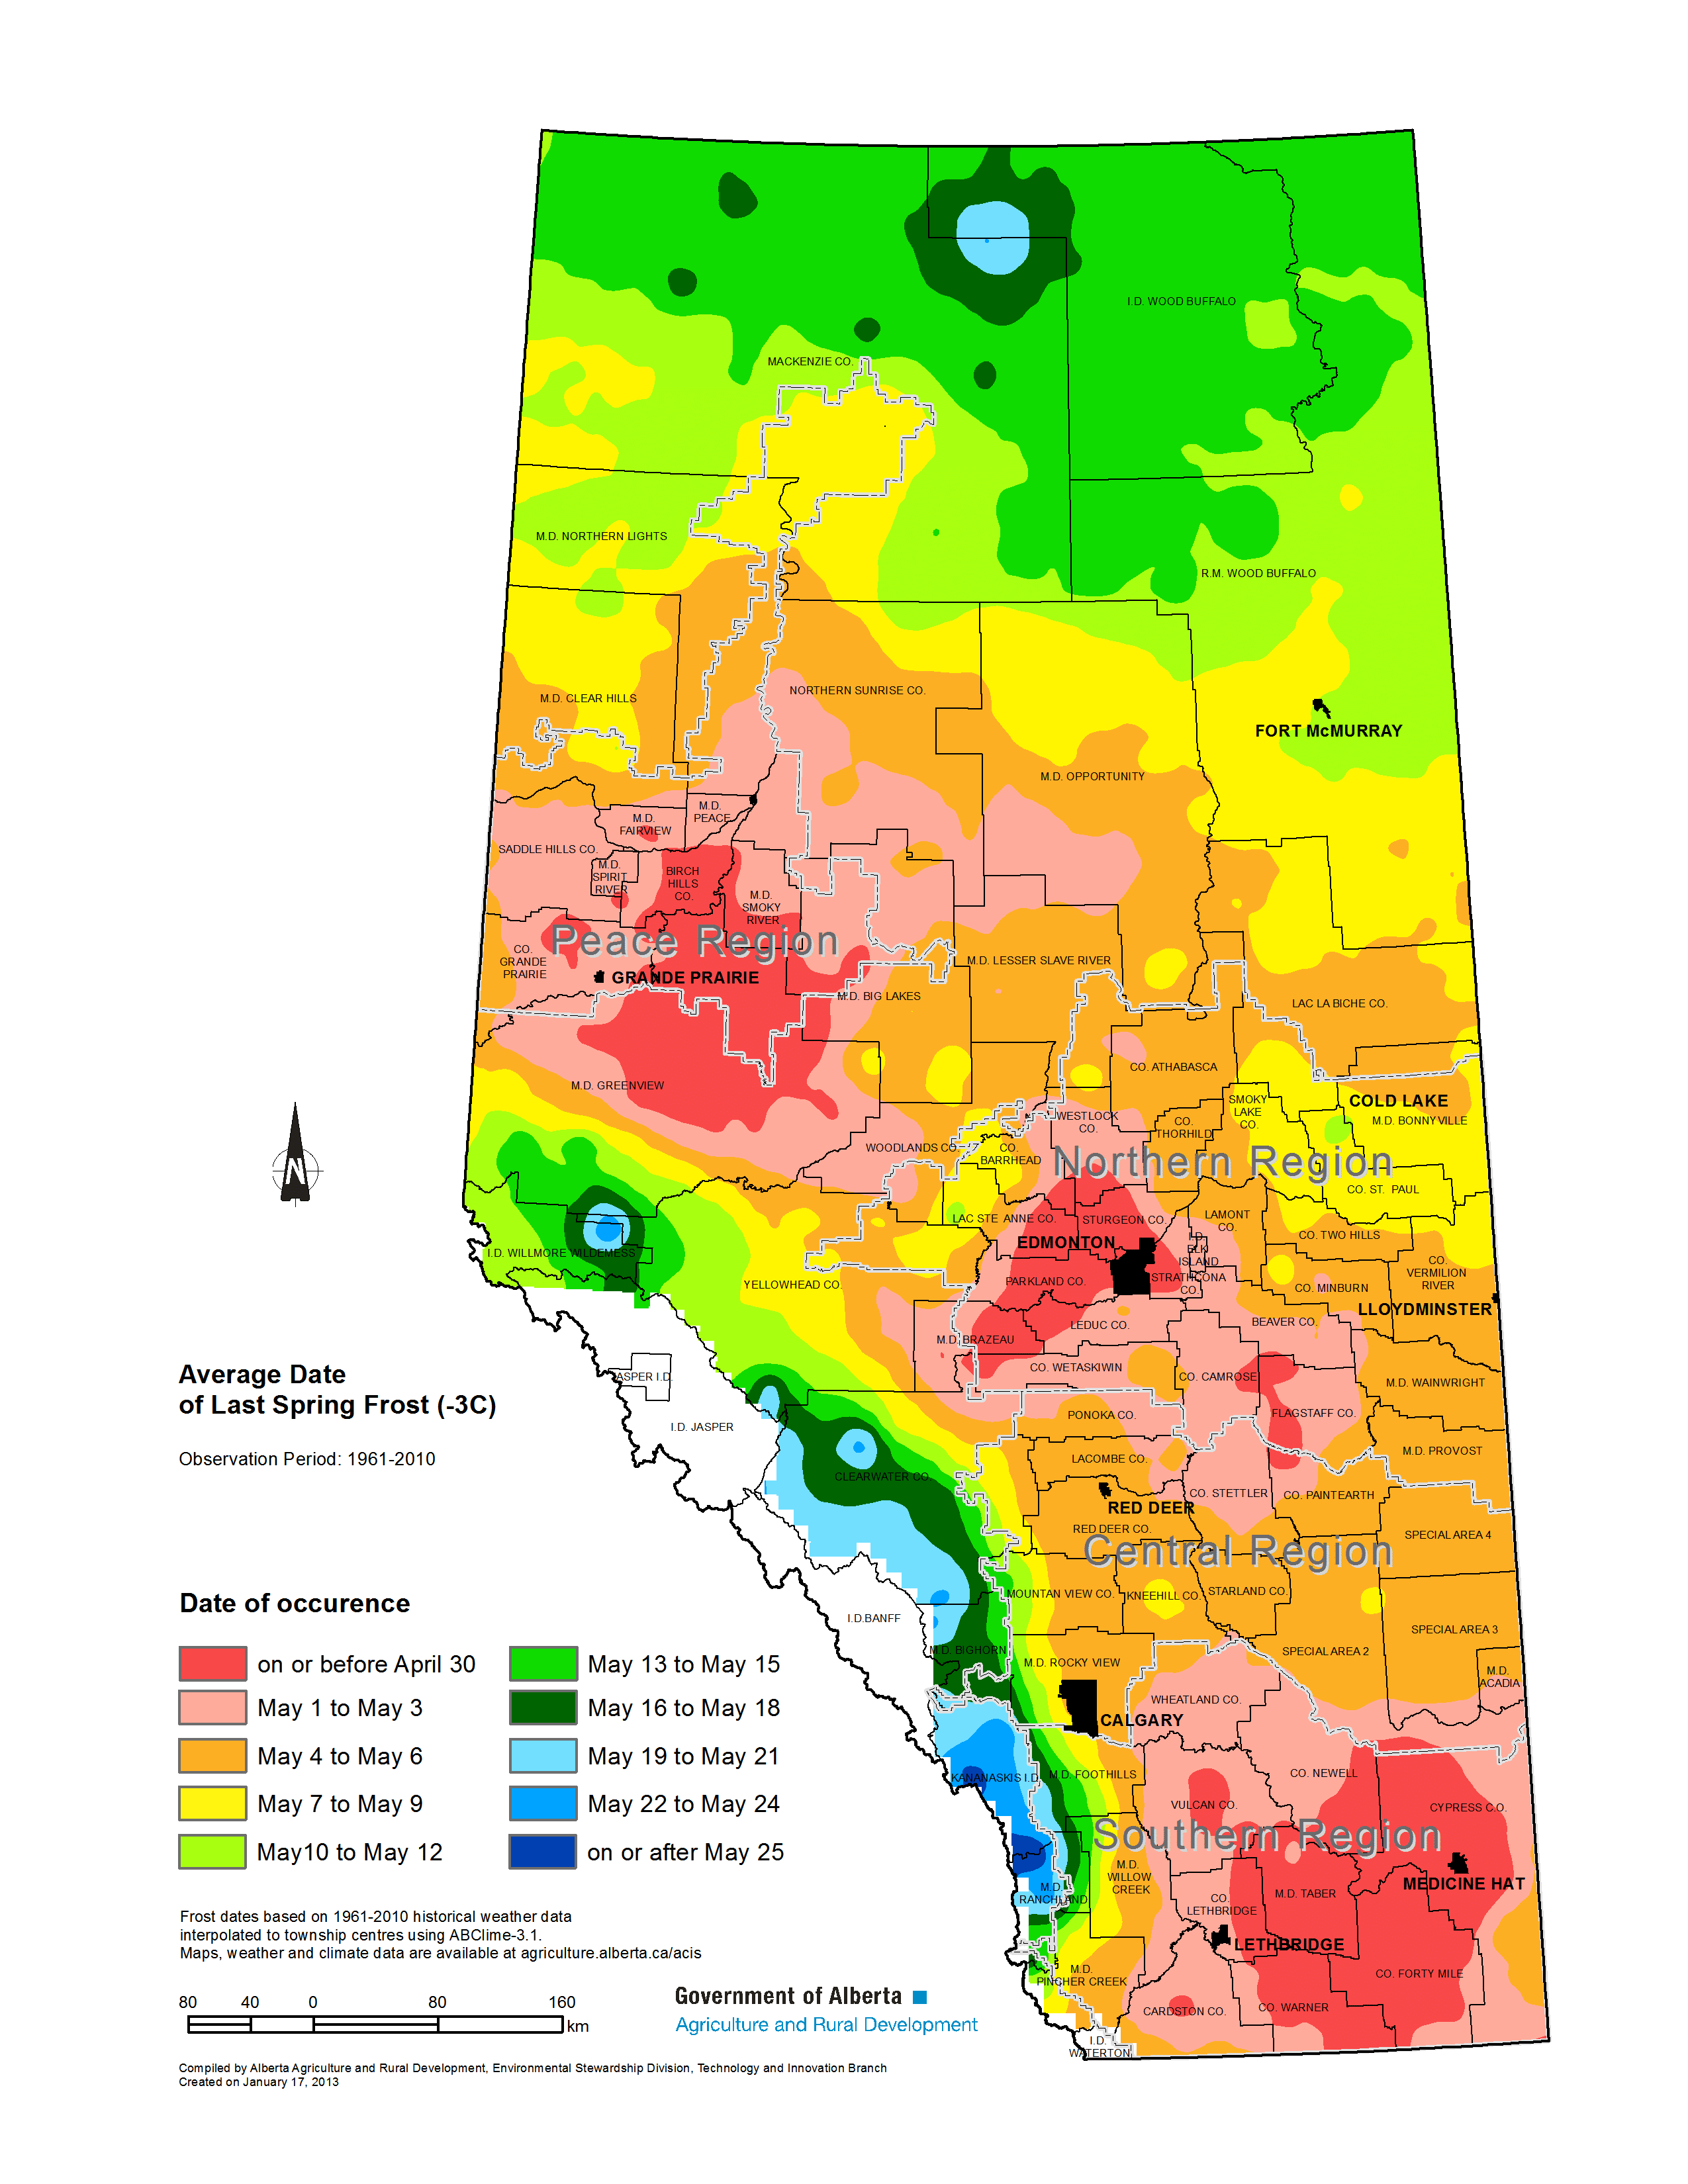 This map shows the average date of the last -3°C frost in Alberta. That means one year in 2, or 50% of the time, a -3°C frost will occur on or after that date.